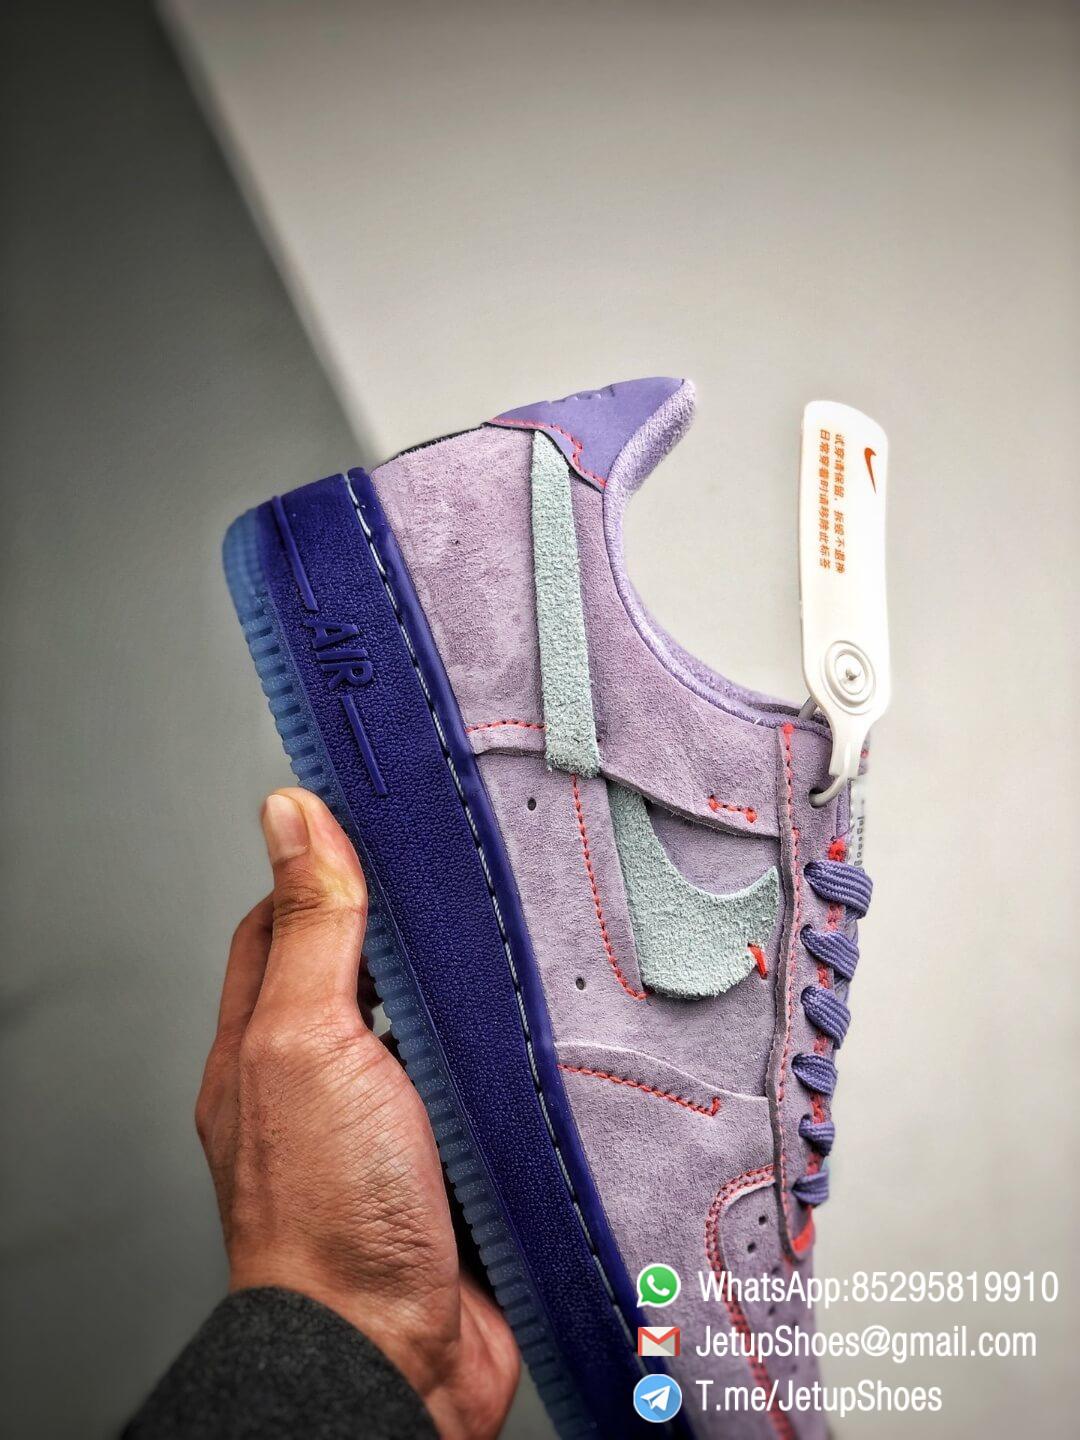 The Nike Wmns Air Force 1 Low LX Purple Agate Suede Upper Orange Stitches Ocean Blue Outsoles Repsneaker 05